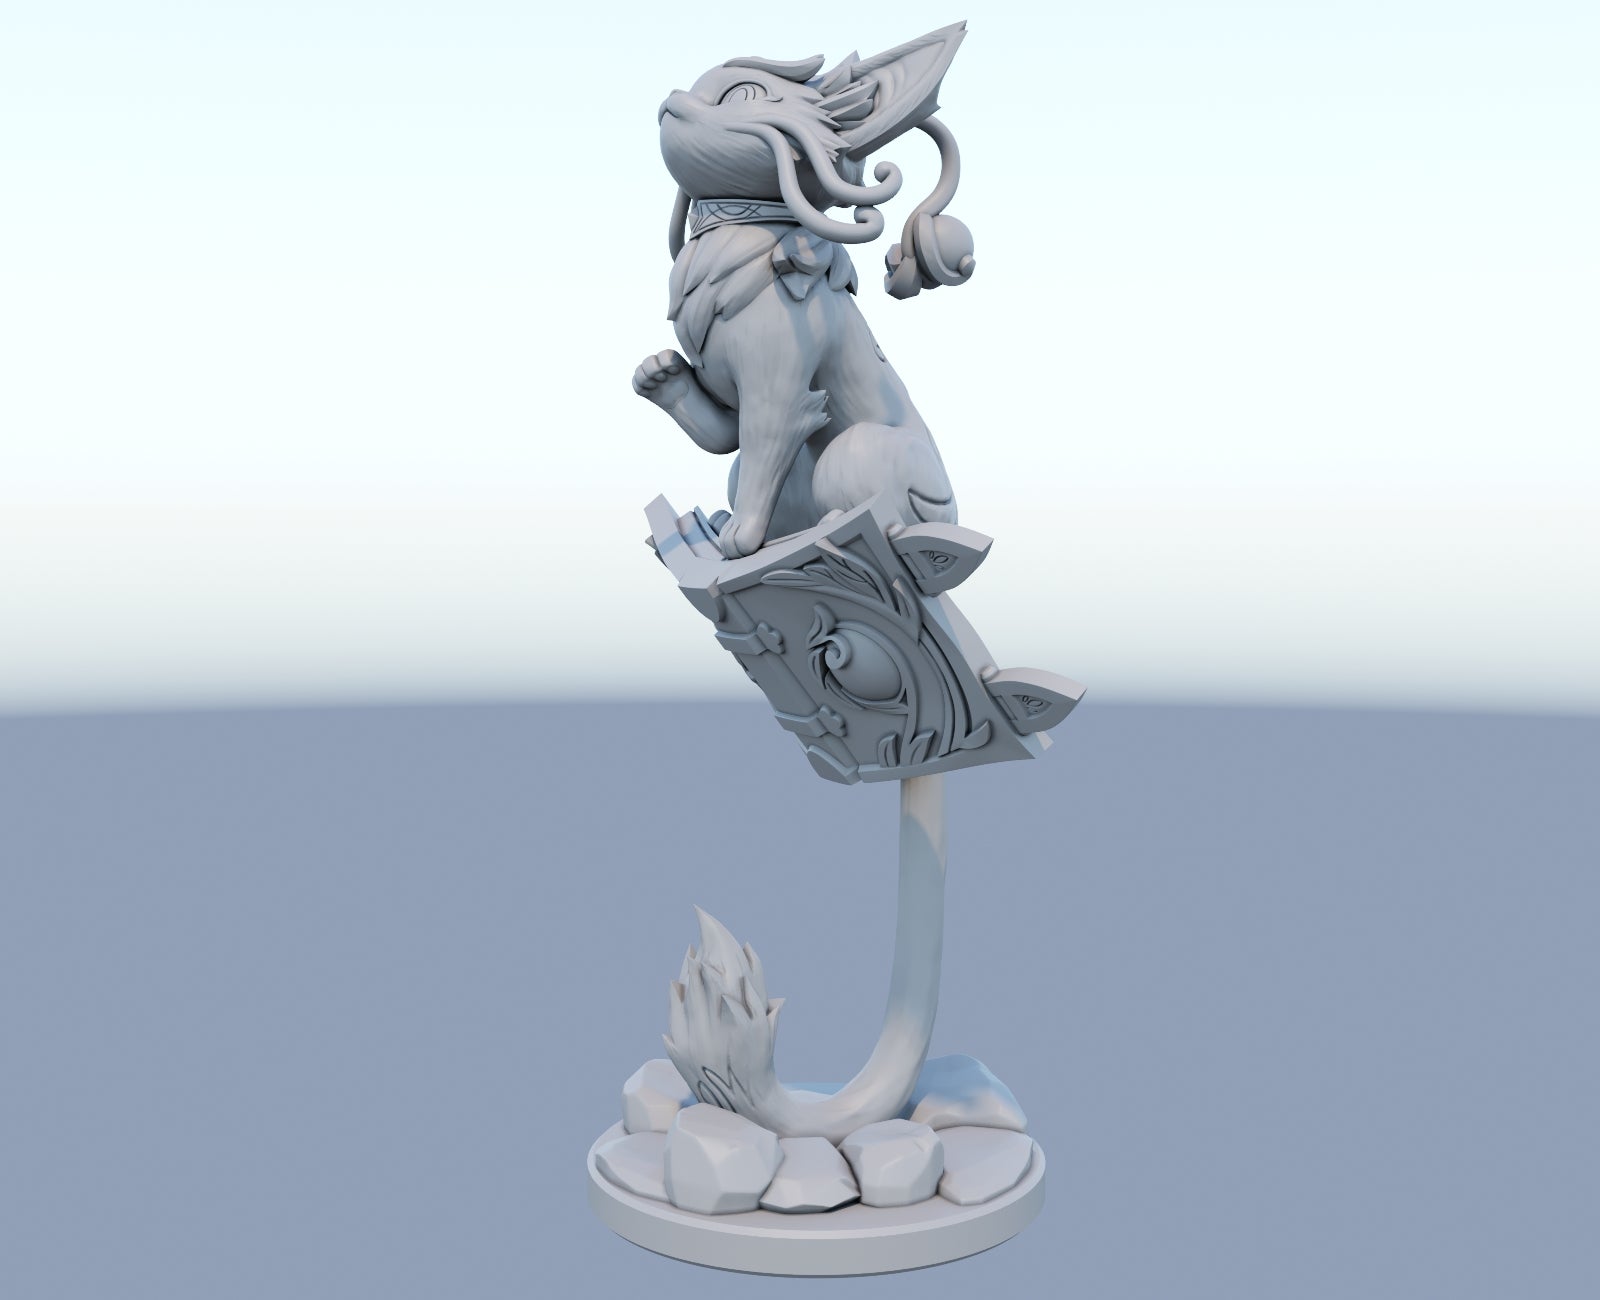 Yuumi 3D-printed League of Legends champion figure. Decorate your gaming setup or home with your favorite League of Legends champion! Choose between the unpainted version, perfect for you to paint yourself, or the hand-painted version by a professional painter. Order your figure today!